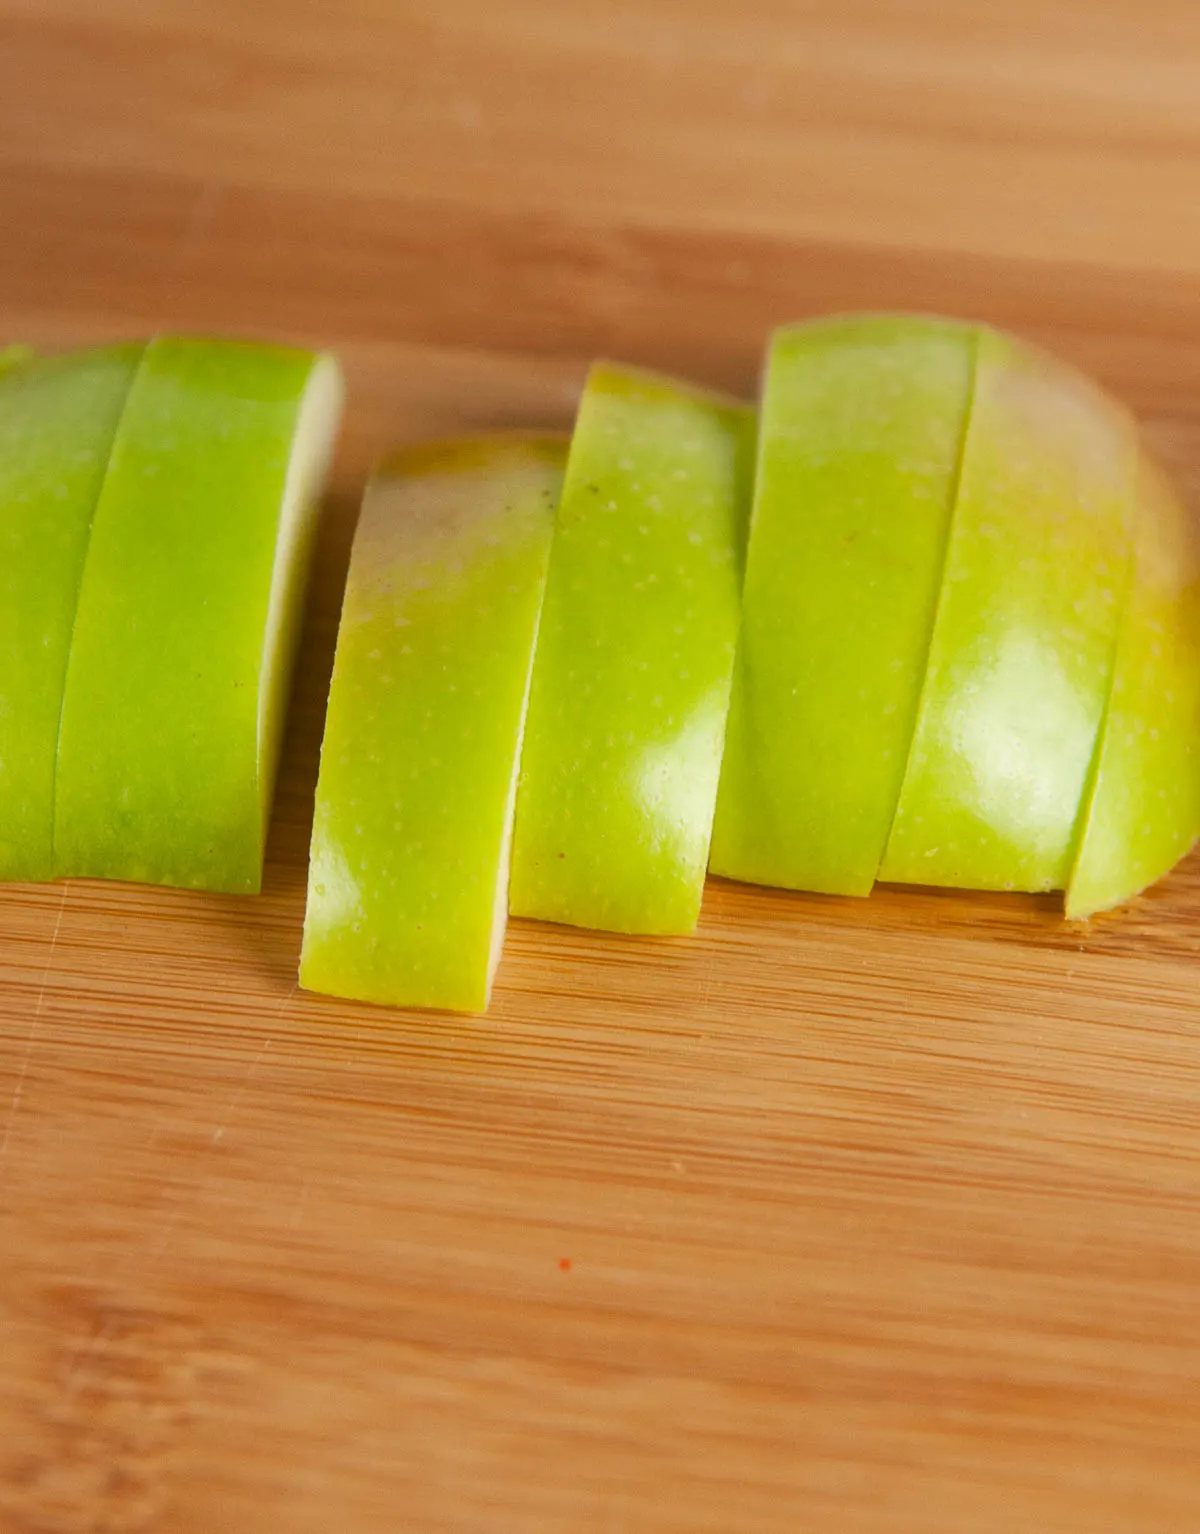 Slice the apples into slices. Do not dice them.